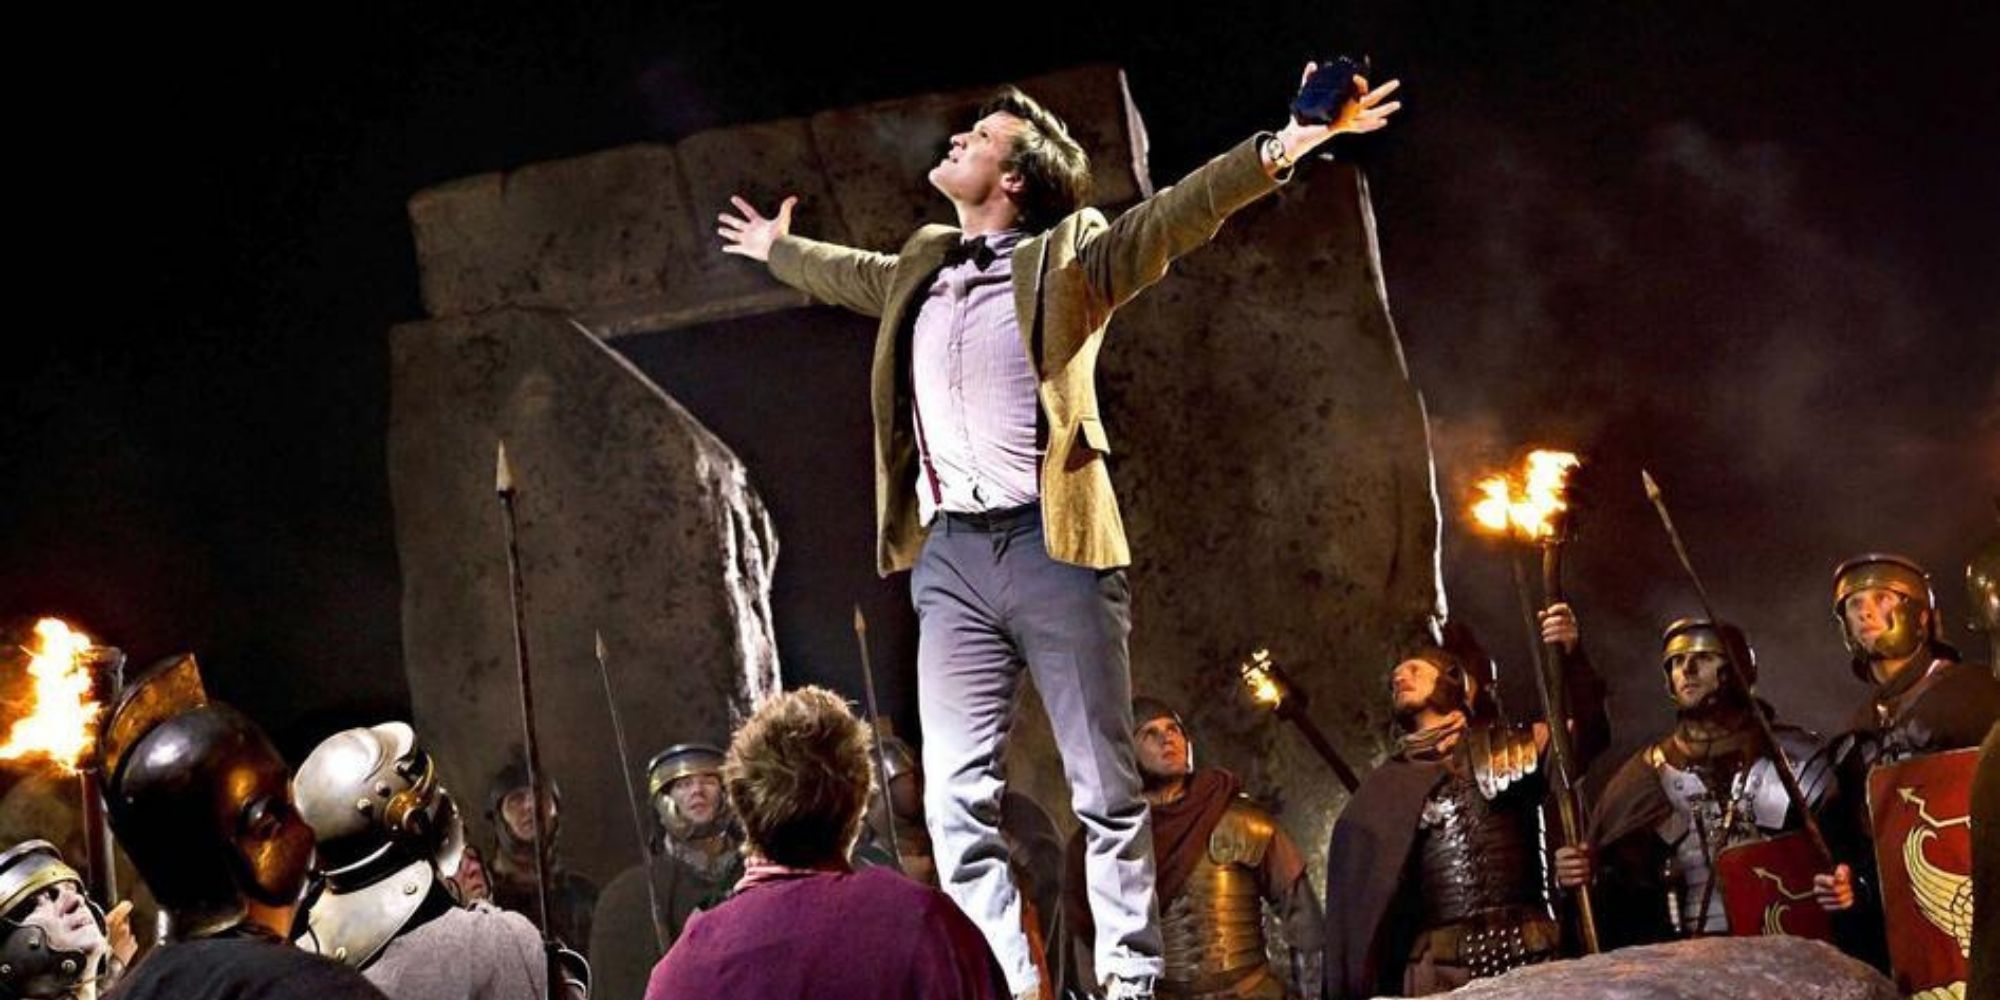 Official image of The Pandorica Opens, an episode from the TV show Doctor Who.